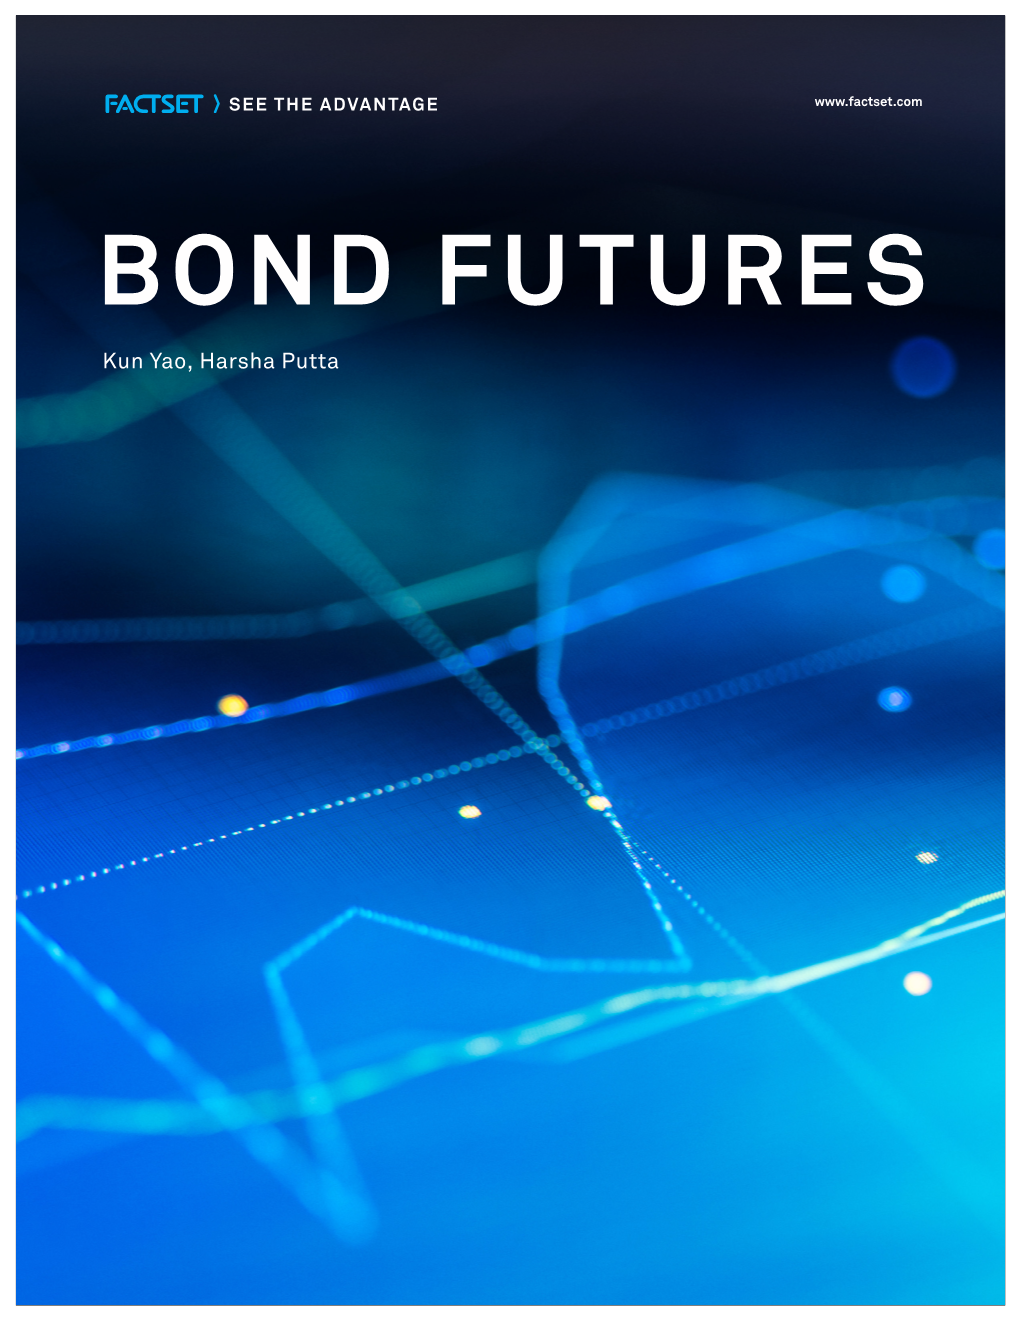 ID15469 Bond Futures White Paper FY20 FINAL